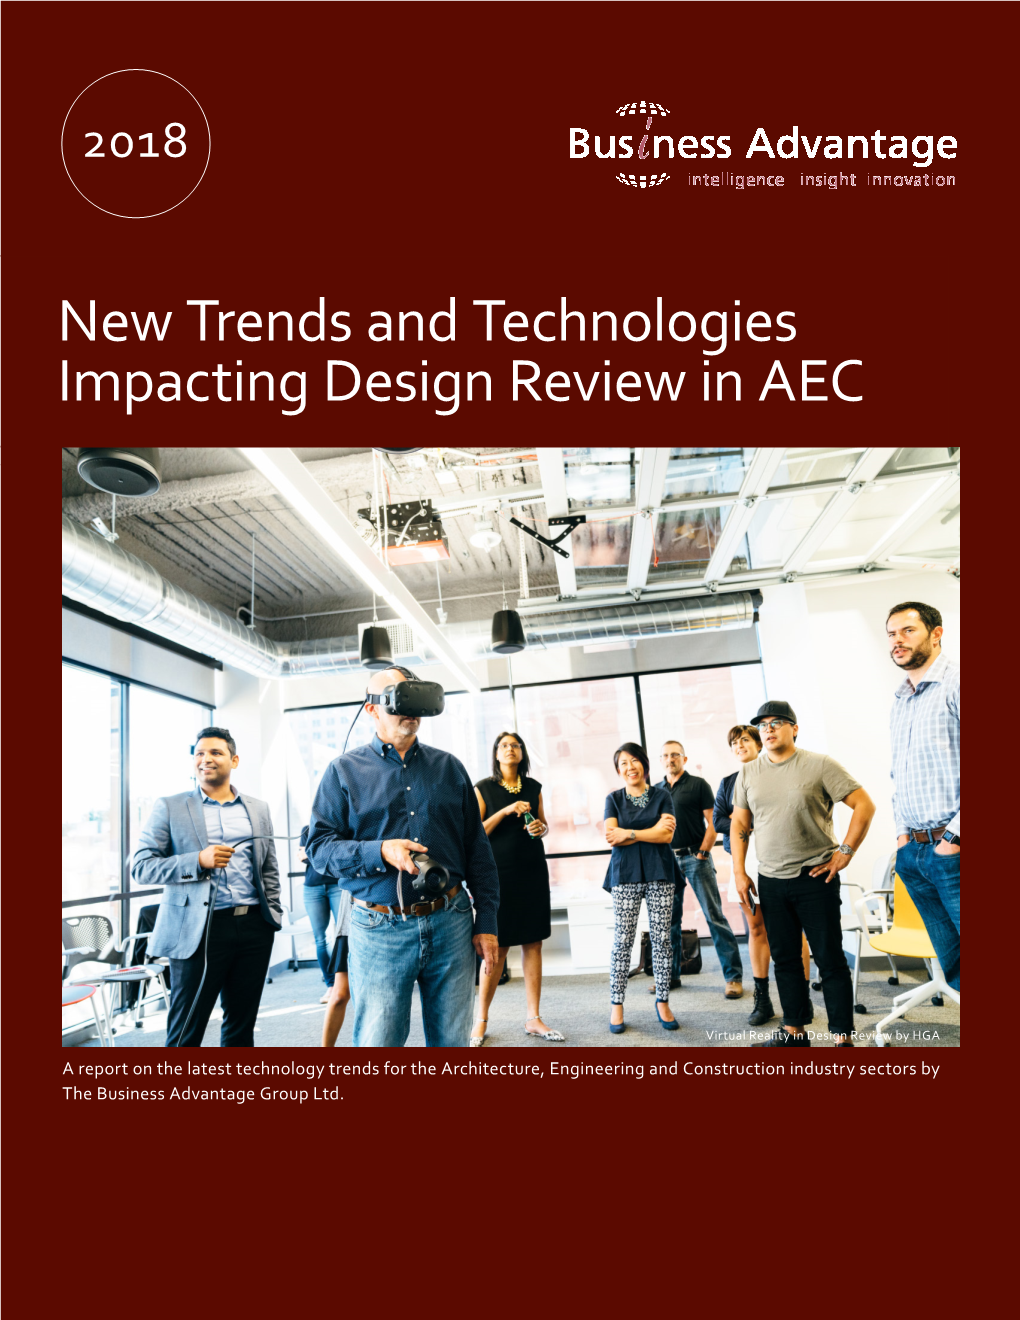 New Trends and Technologies Impacting Design Review in AEC